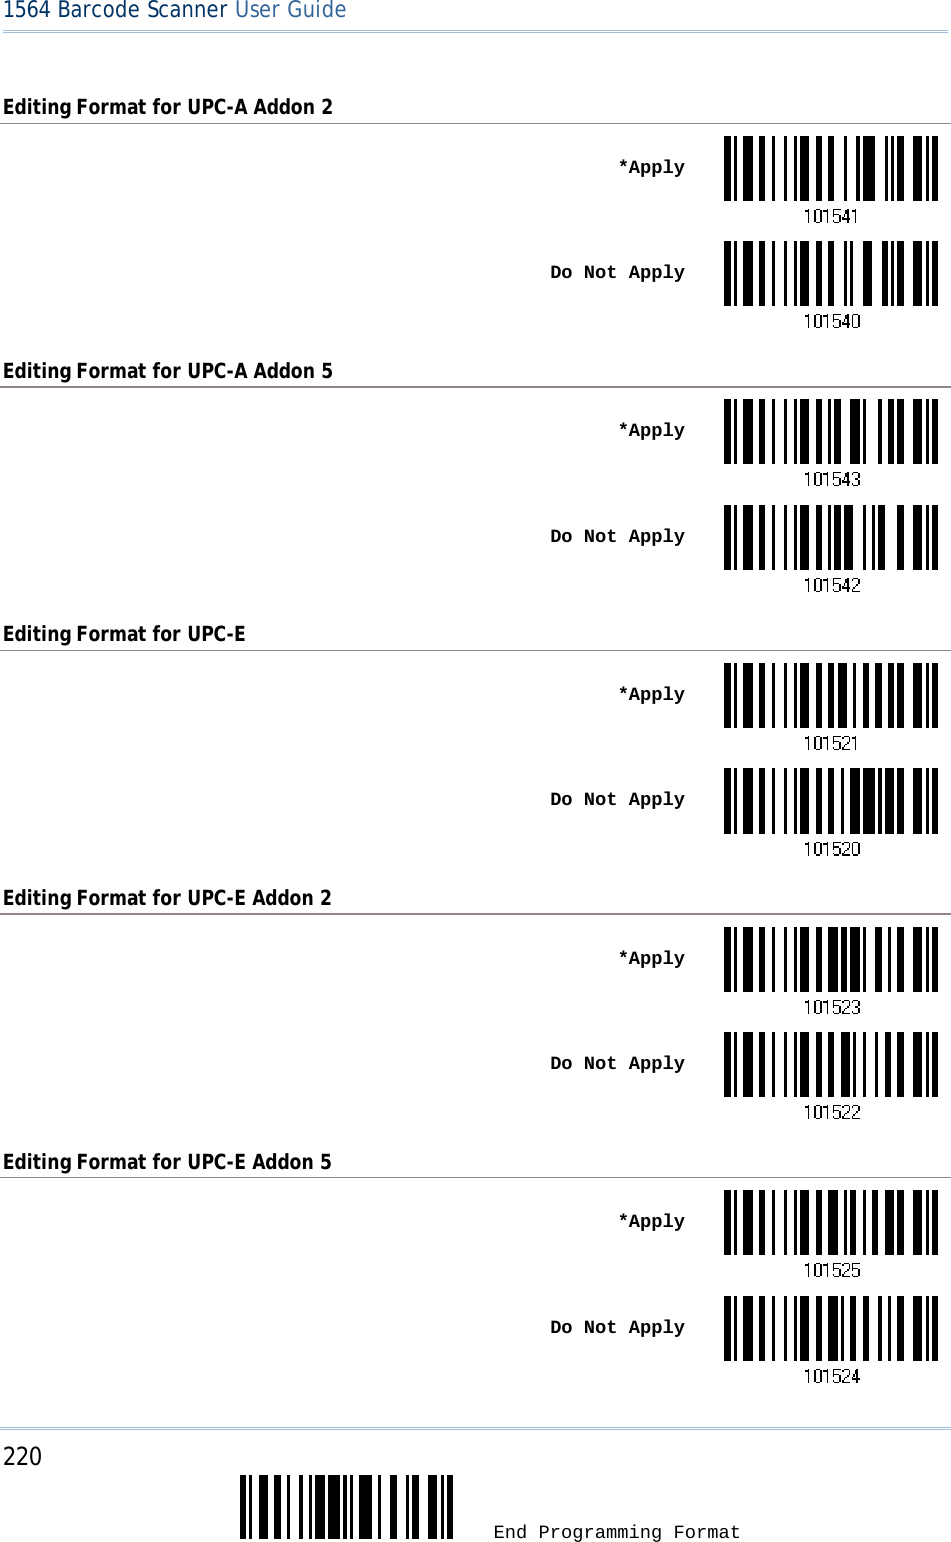 220  End Programming Format 1564 Barcode Scanner User Guide  Editing Format for UPC-A Addon 2  *Apply Do Not ApplyEditing Format for UPC-A Addon 5  *Apply Do Not ApplyEditing Format for UPC-E  *Apply Do Not ApplyEditing Format for UPC-E Addon 2  *Apply Do Not ApplyEditing Format for UPC-E Addon 5  *Apply Do Not Apply